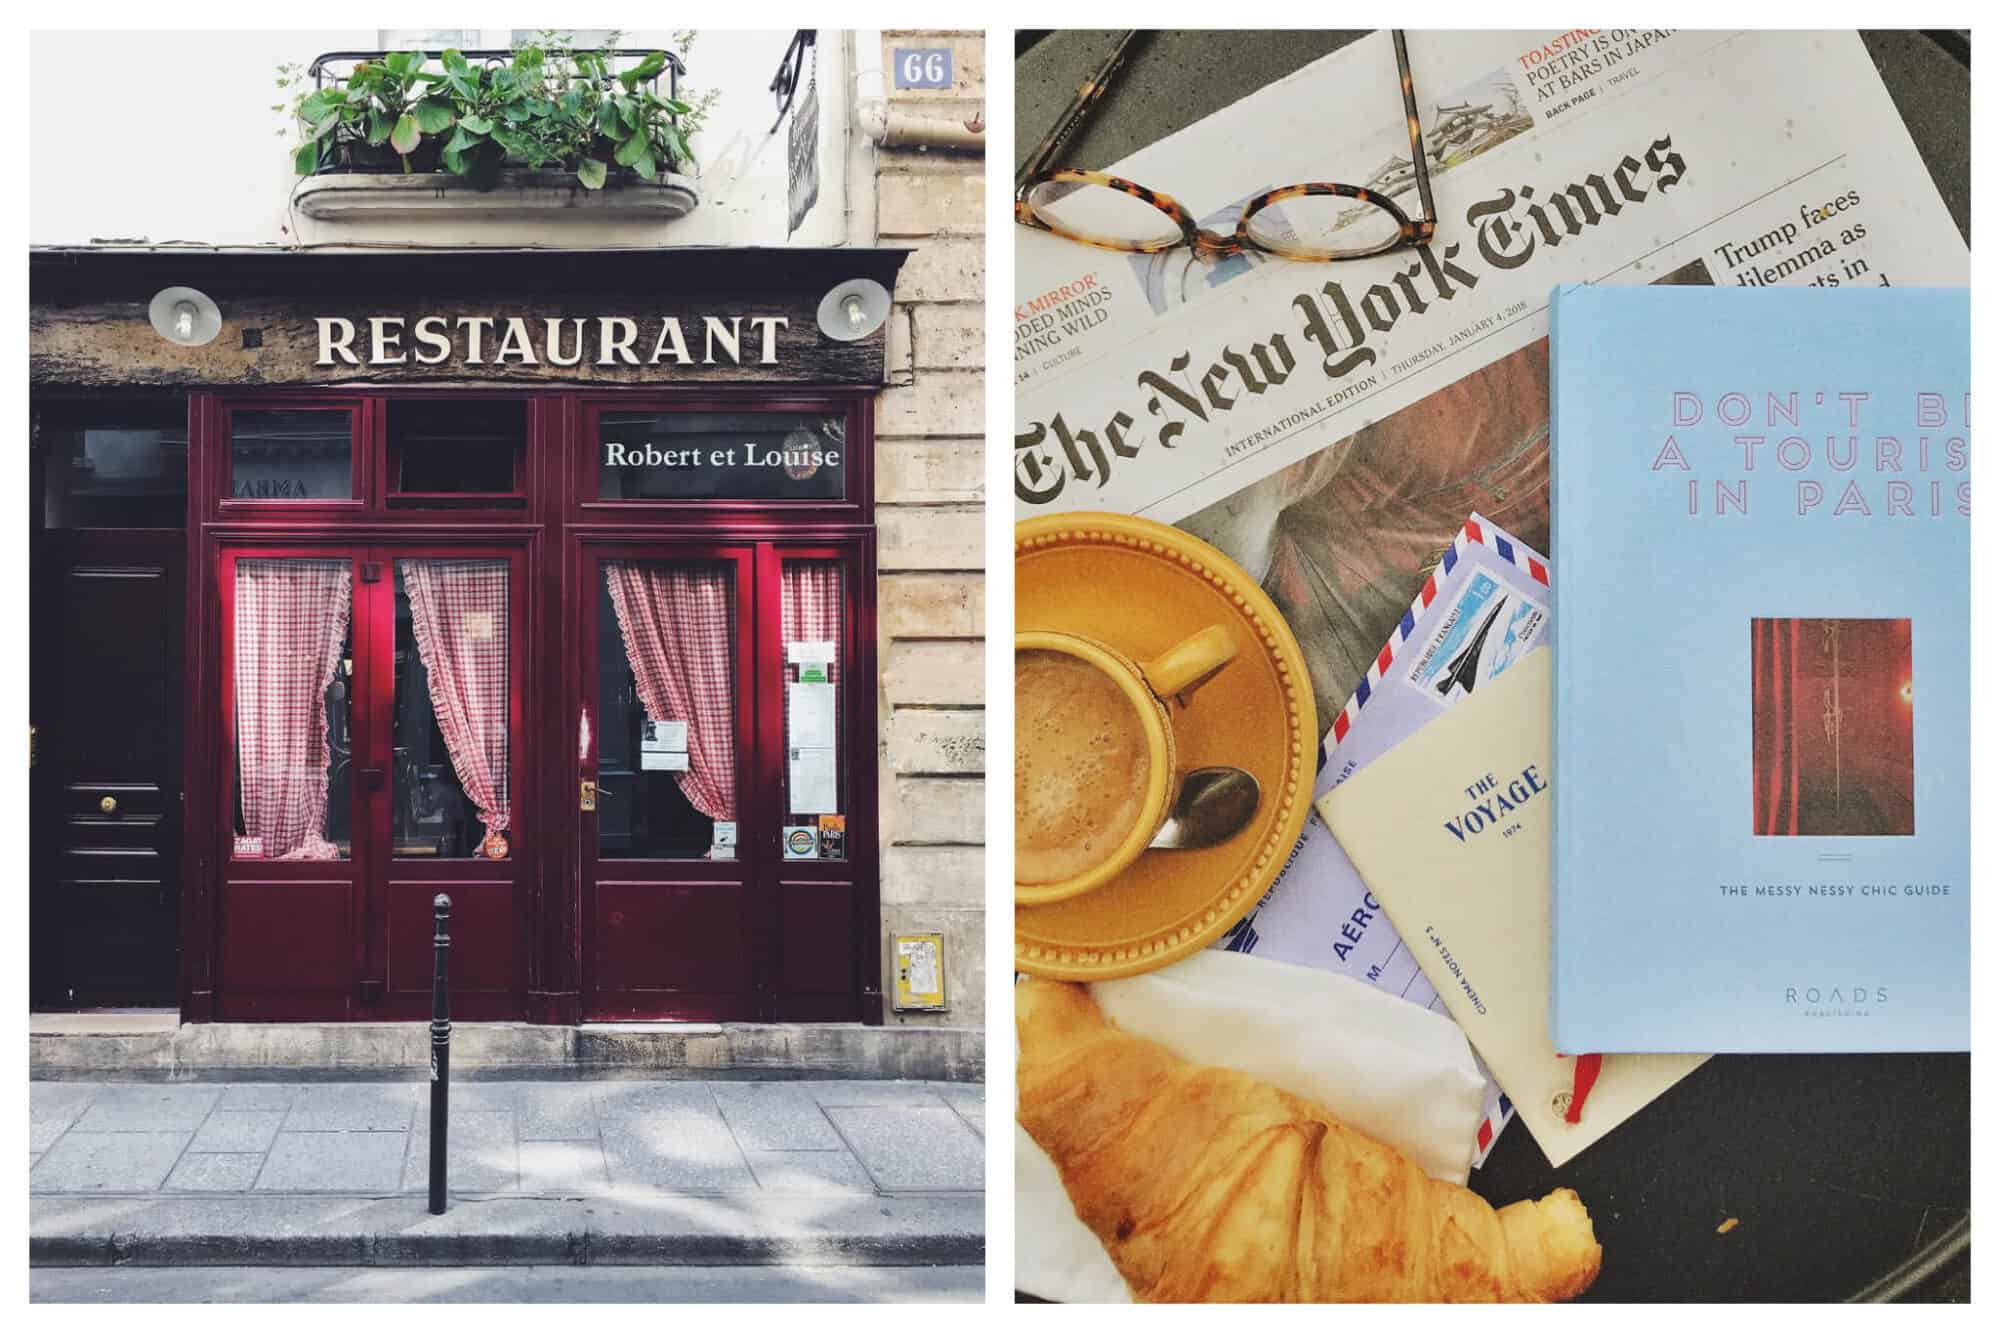 Left: The storefront of the quaint, authentic french restaurant Robert et Louise in Paris' Marais neighborhood, Right: An overview of an assortment of items on a table, including the New York Times, an espresso, a pair of glasses, a croisant and the book "Don't Be a Tourist in Paris" by Vanessa Grall